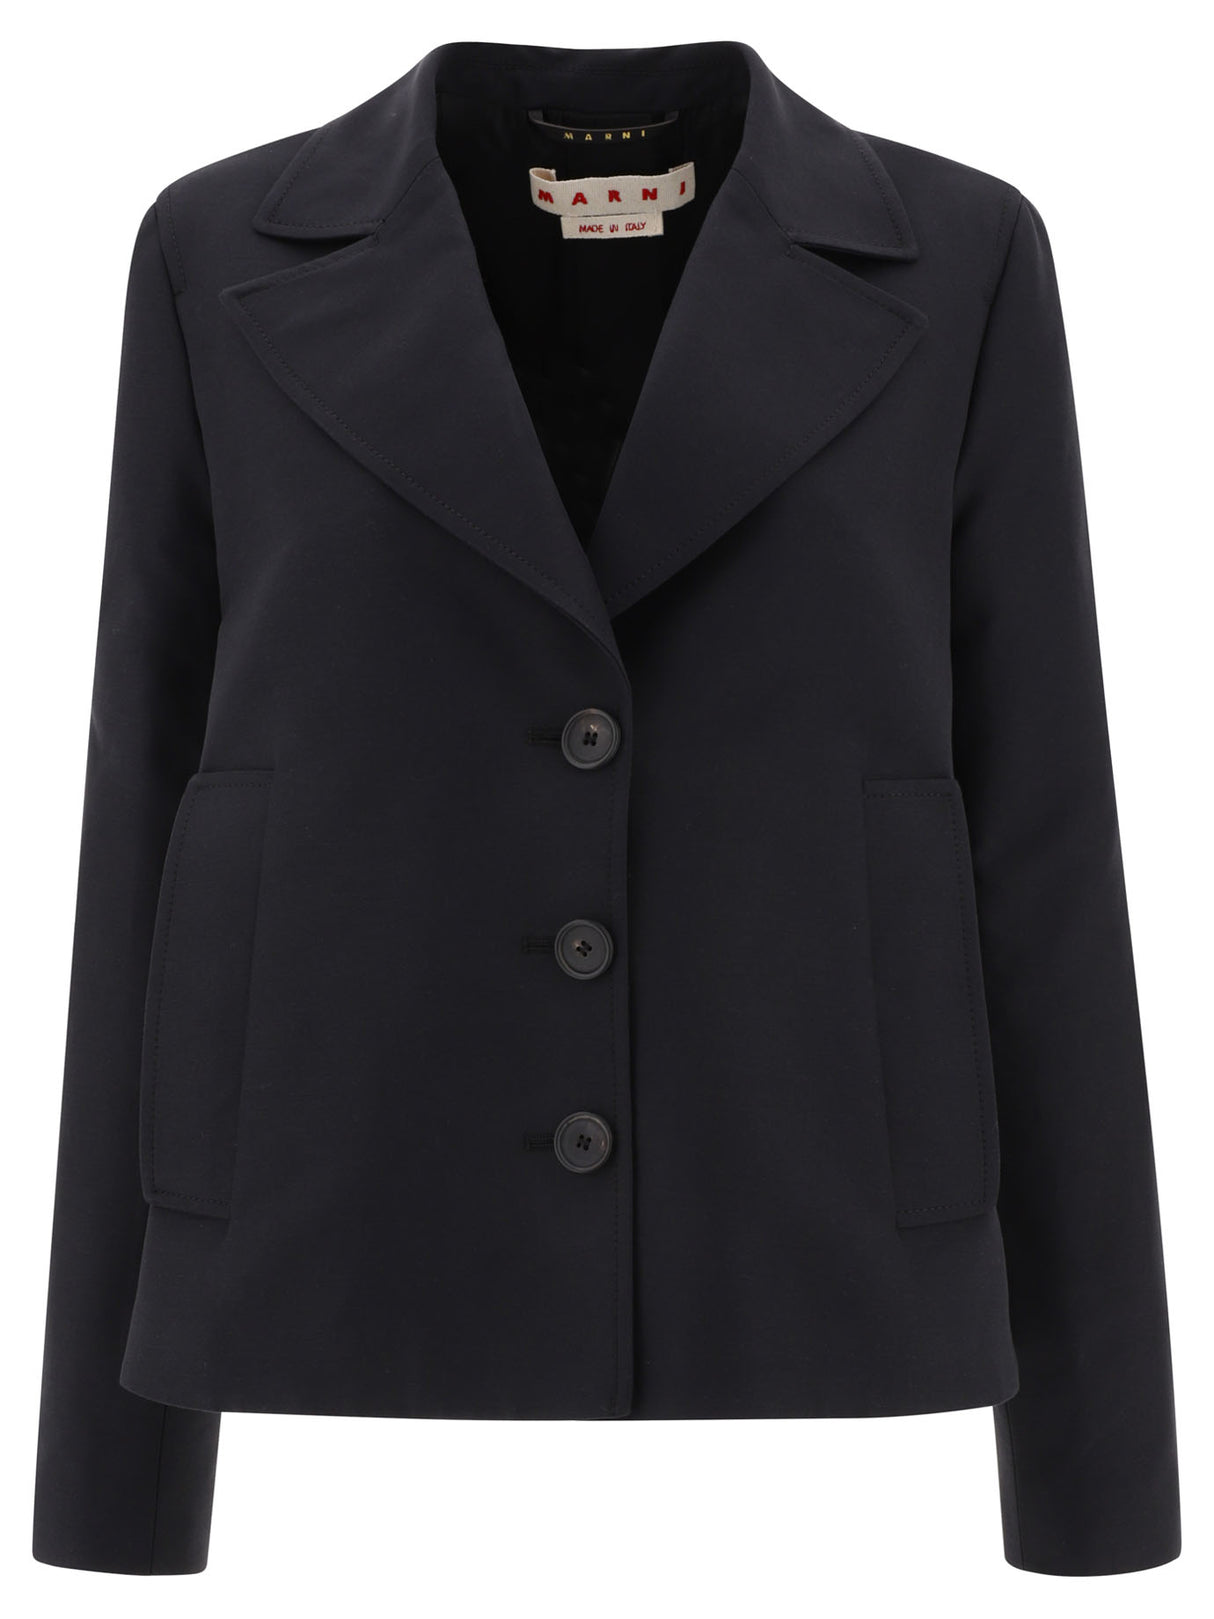 MARNI Classic Black A-Line Cady Jacket for Women